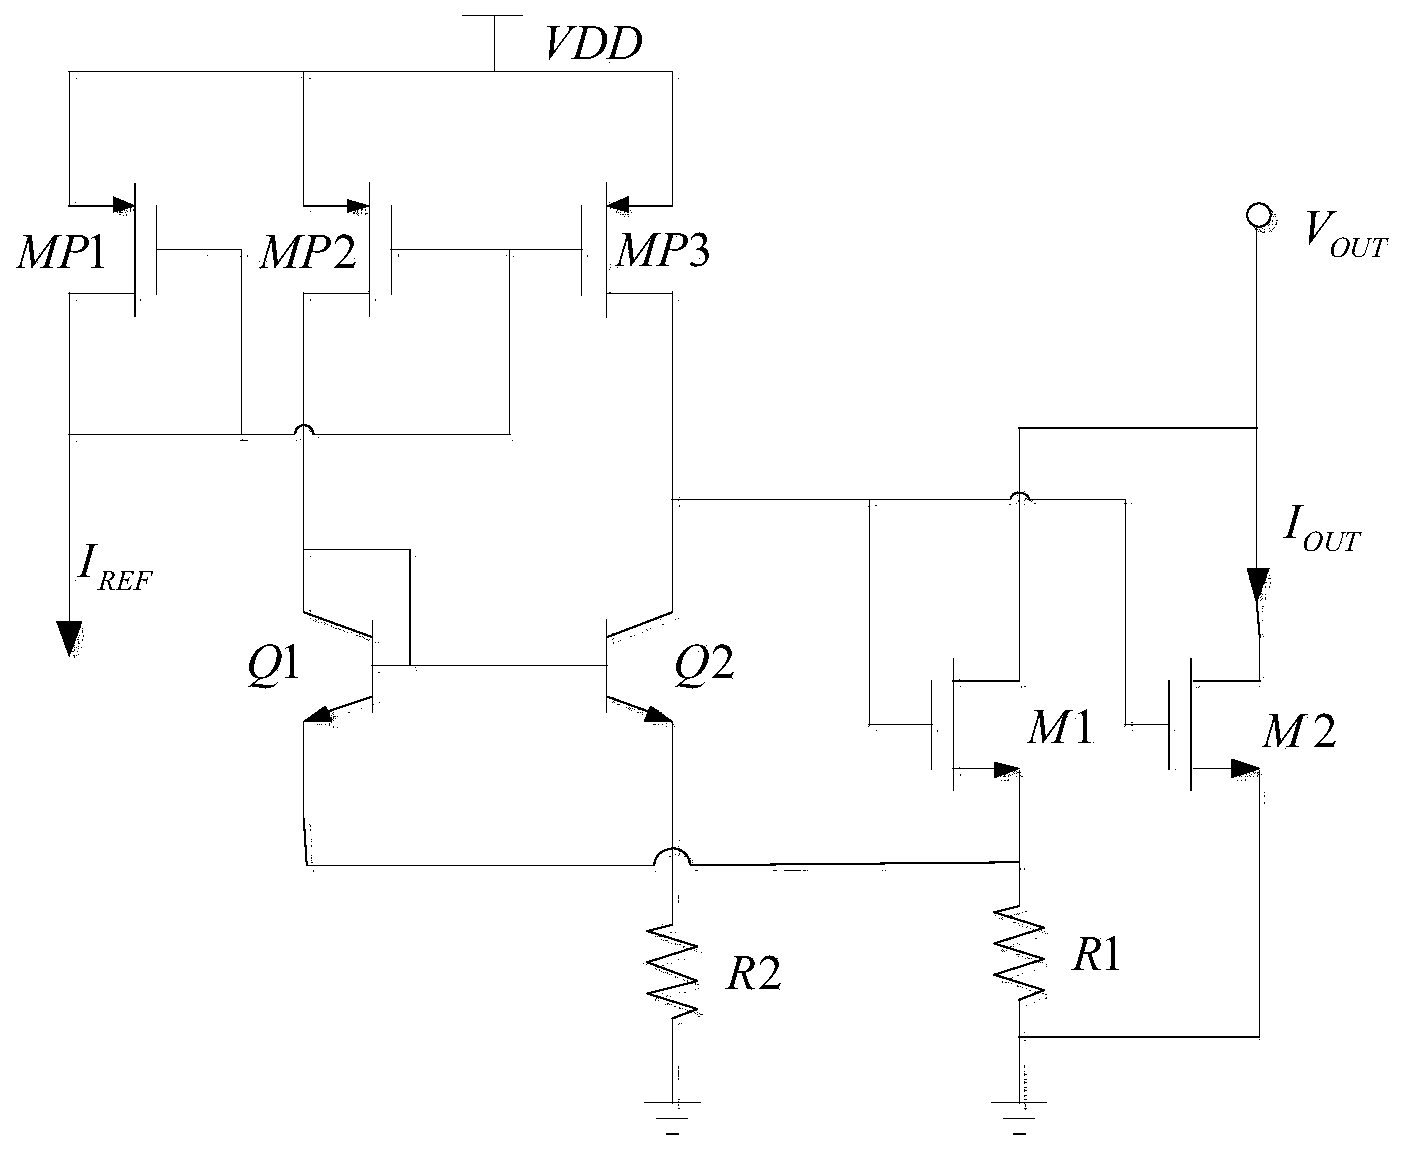 High-voltage high-current control circuit applied to high-voltage power MOSFET (metal-oxide-semiconductor field effect transistor) circuit